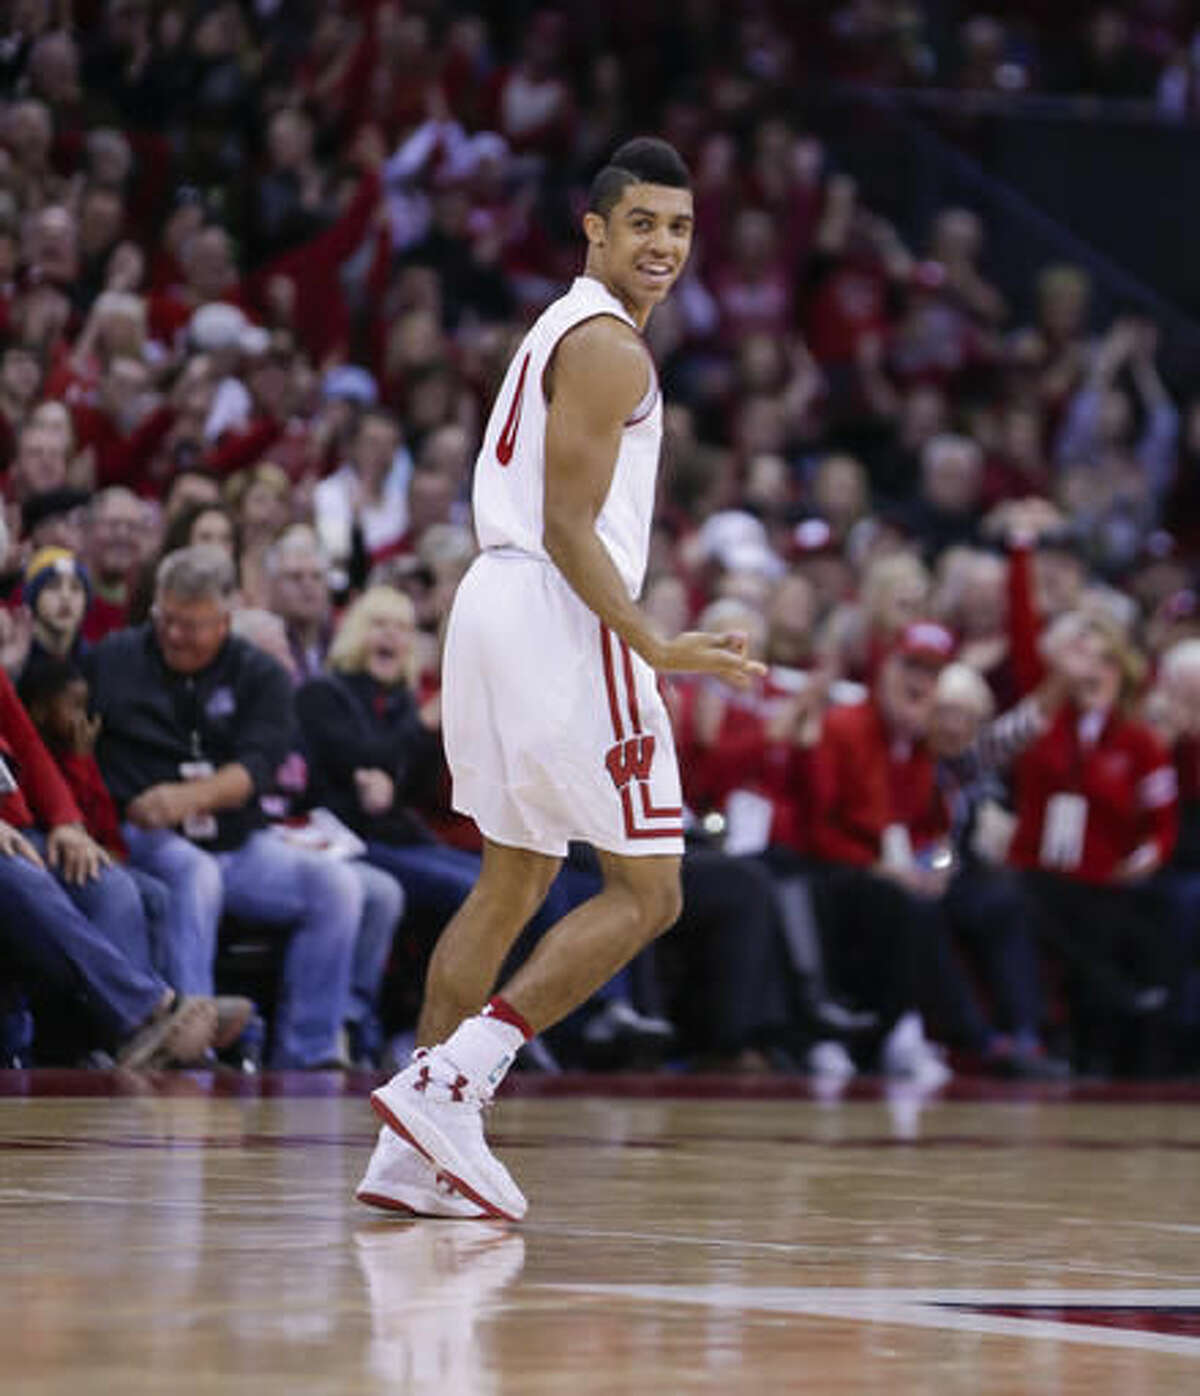 Wisconsin's D'Mitrik Trice (0) reacts after hitting a 3-point basket against Oklahoma during the second half of an NCAA college basketball game Saturday, Dec. 3, 2016, in Madison, Wis. Wisconsin won 90-70. Trice had 16 points in Wisconsin's 90-70 win. (AP Photo/Andy Manis)